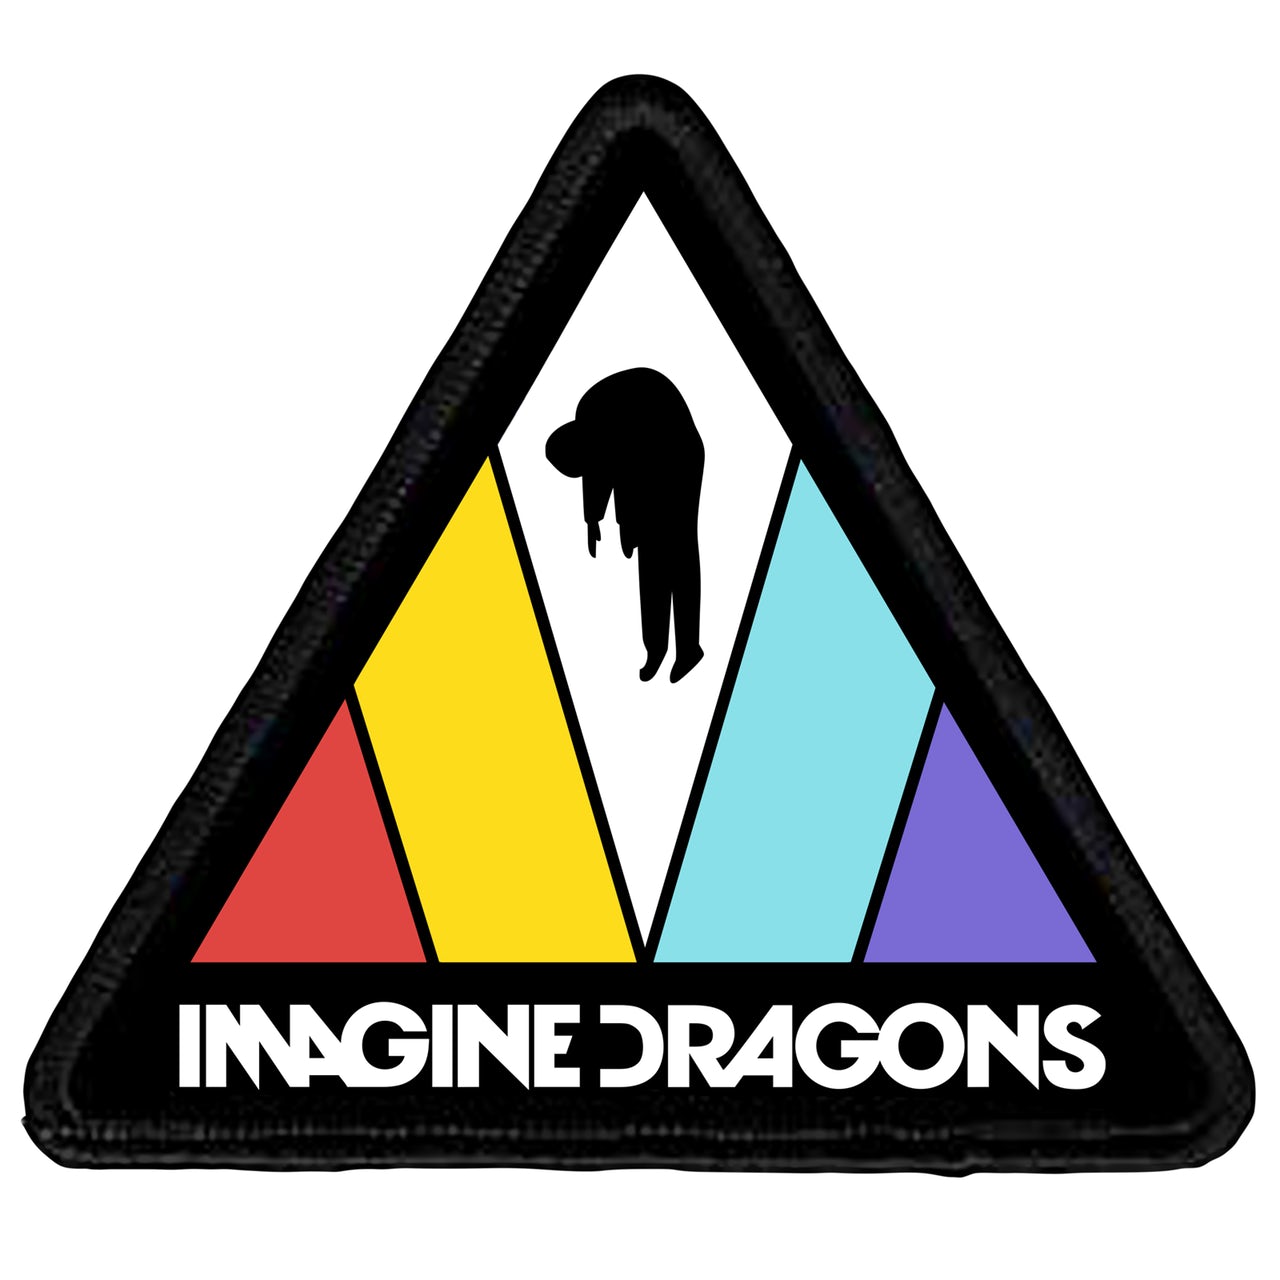 imagine dragons logo png 10 free Cliparts | Download images on ...